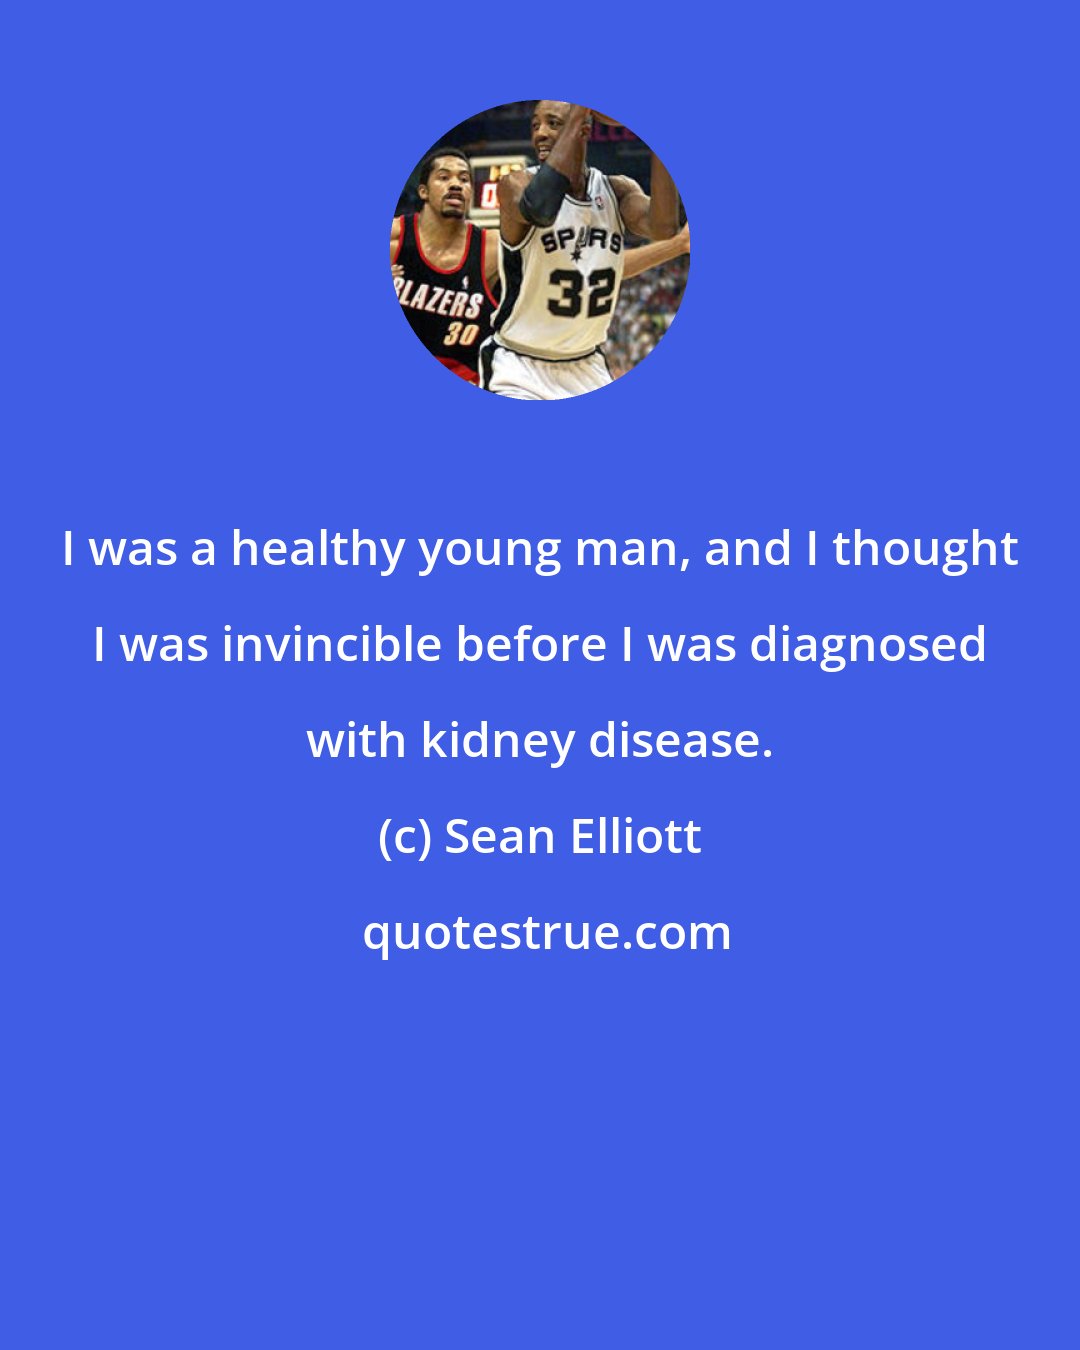 Sean Elliott: I was a healthy young man, and I thought I was invincible before I was diagnosed with kidney disease.